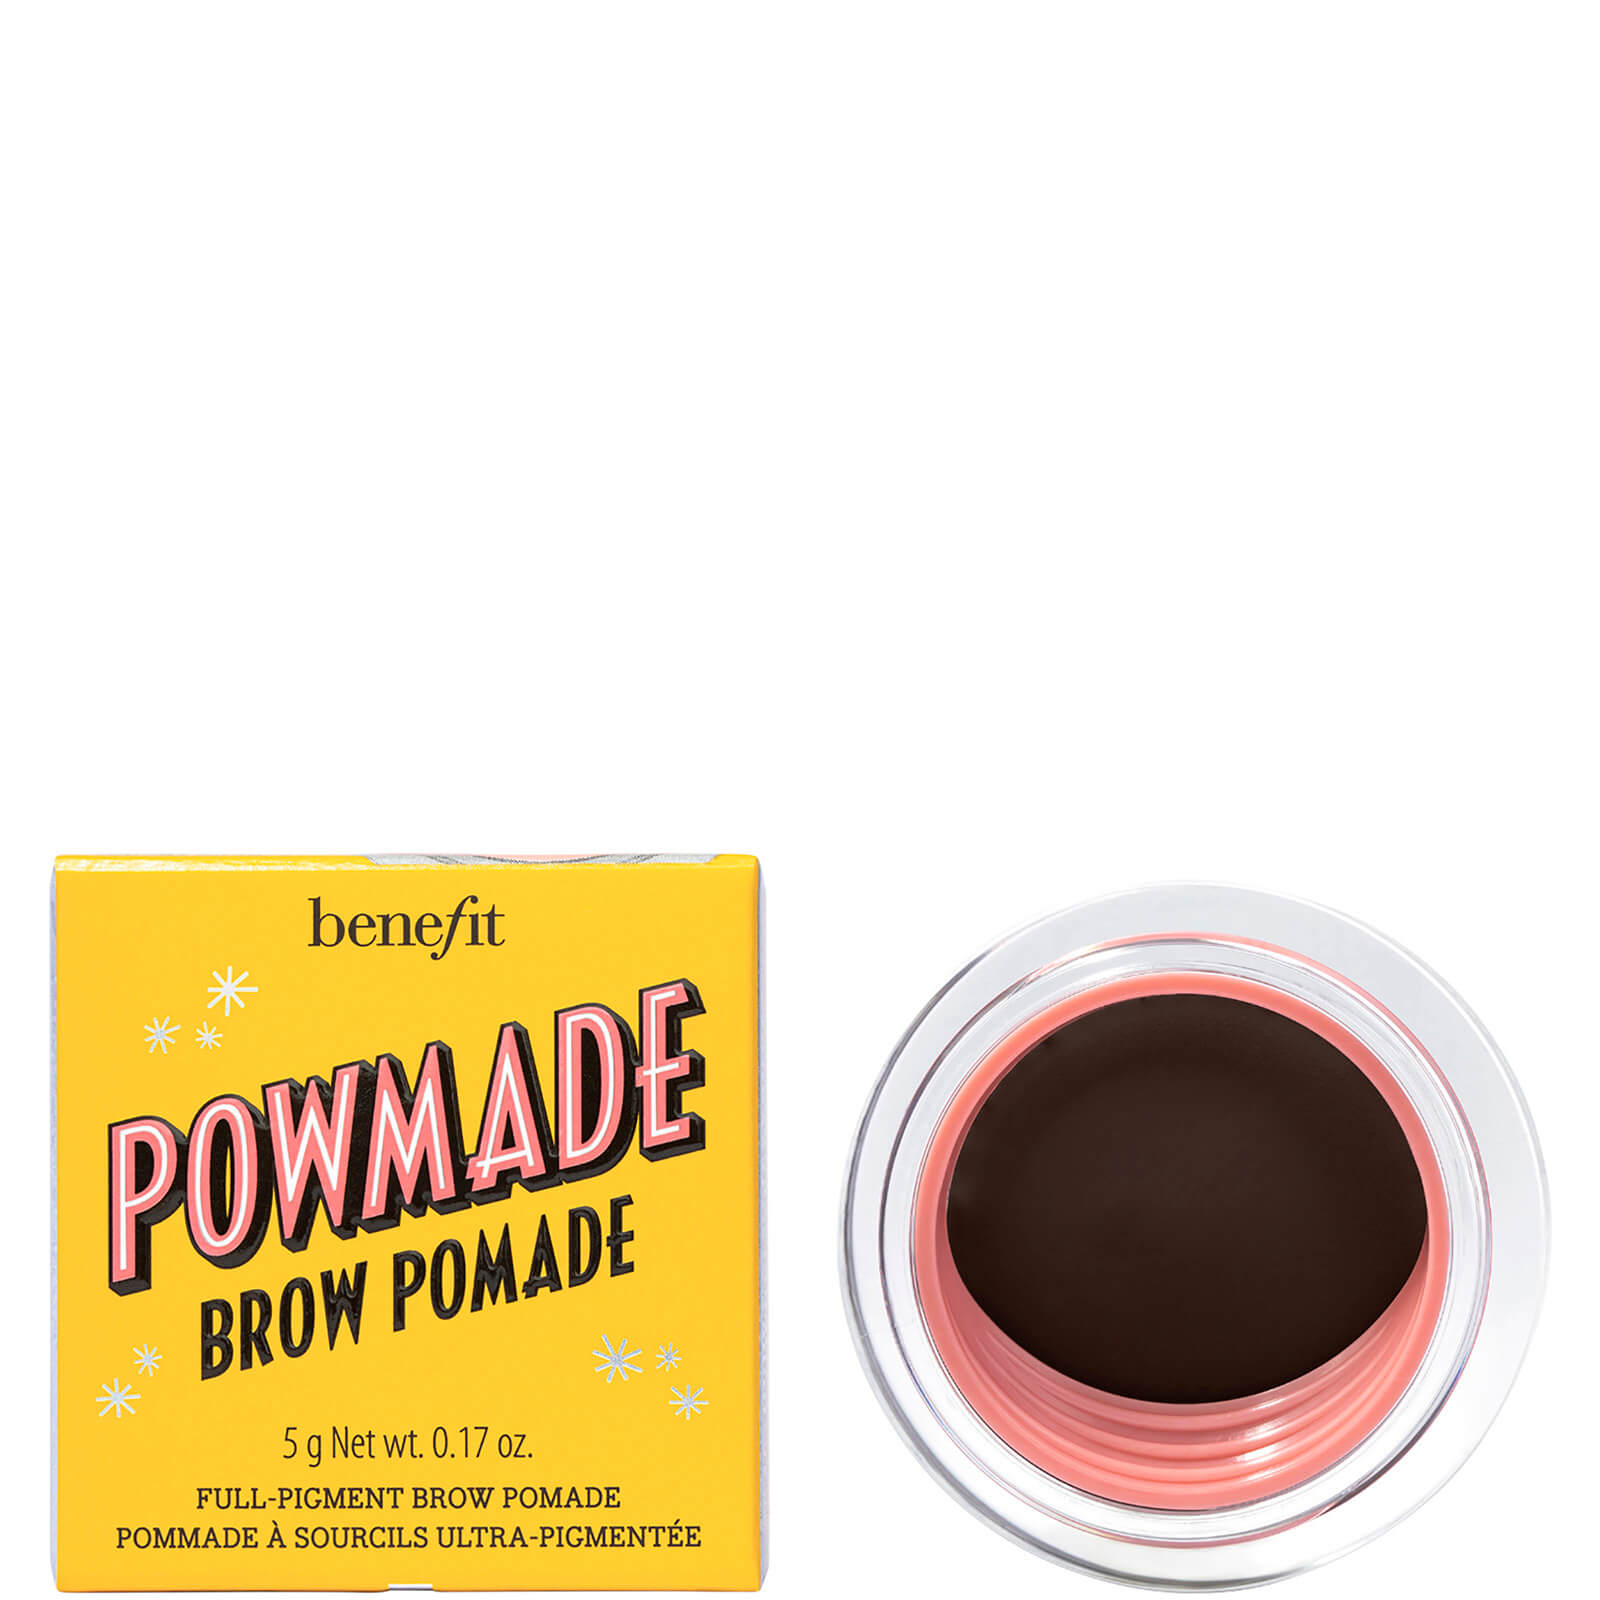 benefit Powmade Full Pigment Eyebrow Pomade 5g (Various Shades) - 5 Warm Black-Brown